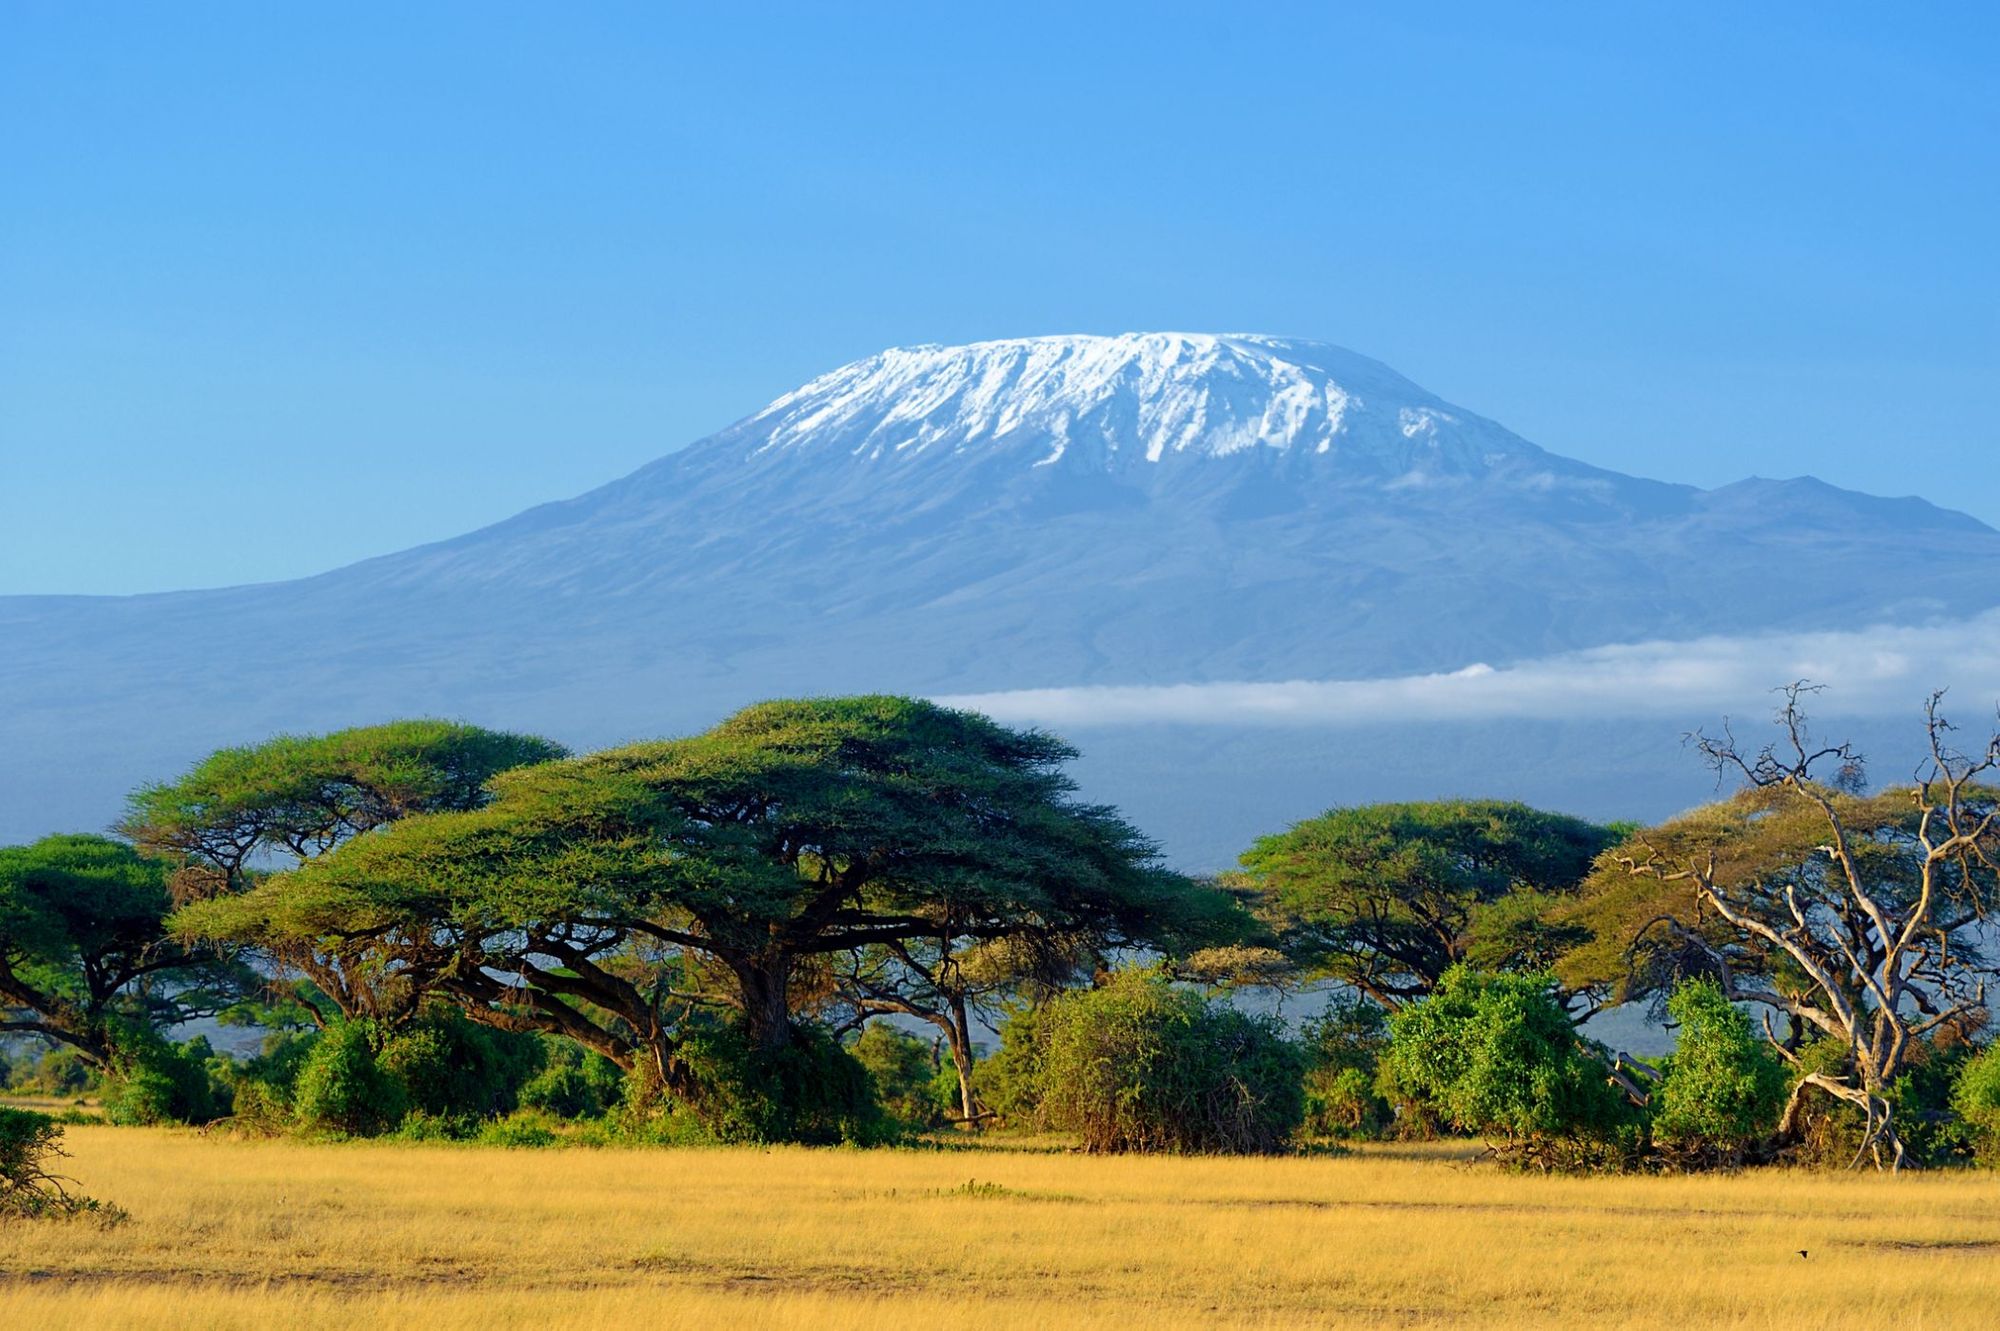 The snowcapped plateau of Mount Kilimanjaro, the highest mountain in Africa. 